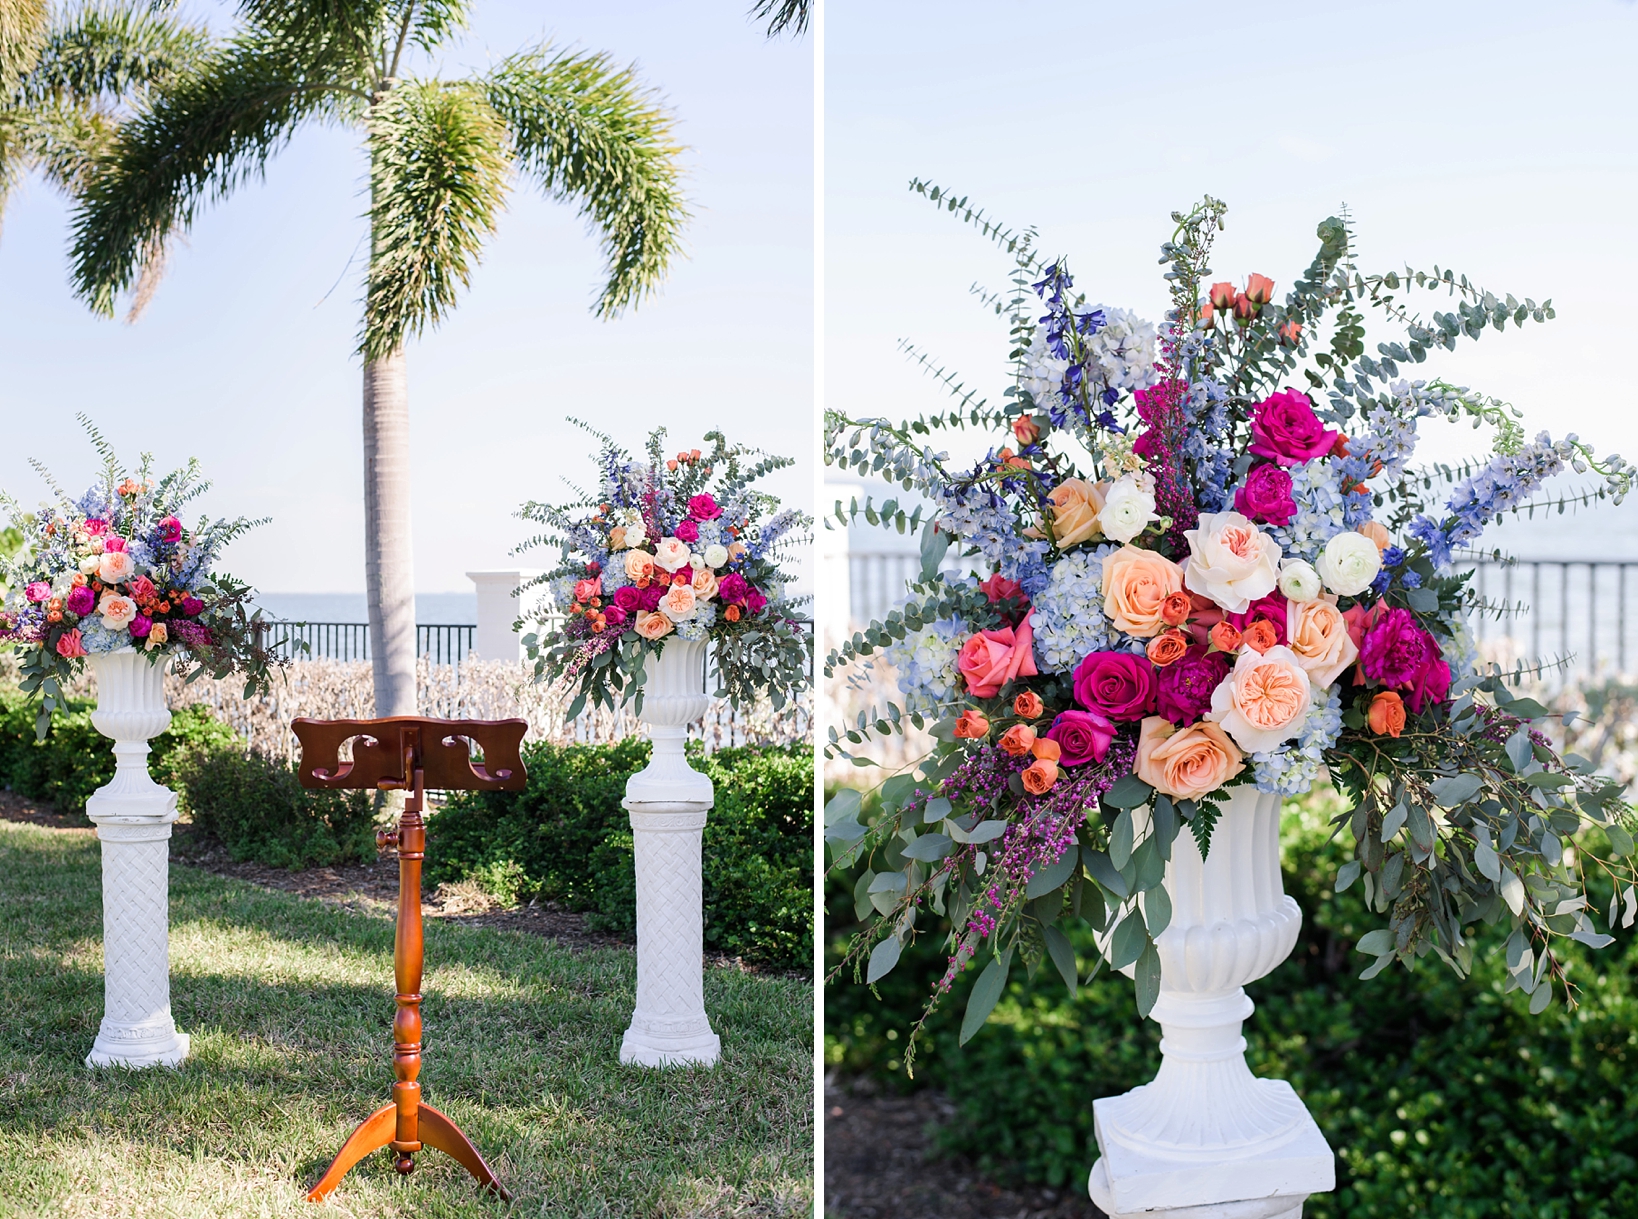 Large colorful floral bouquets at the ceremony space